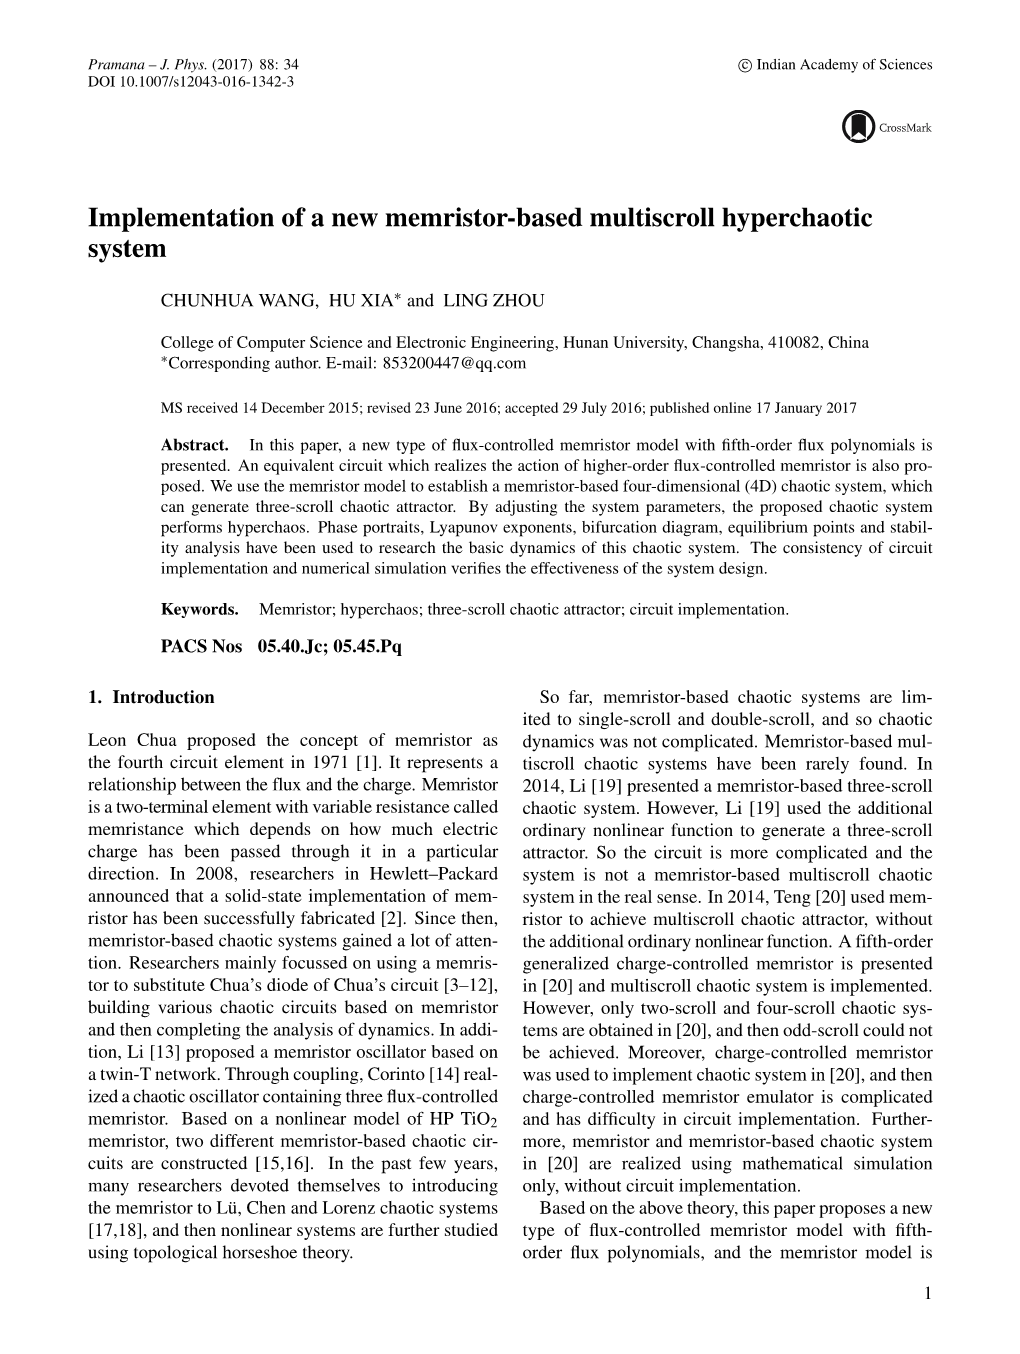 Implementation of a New Memristor-Based Multiscroll Hyperchaotic System